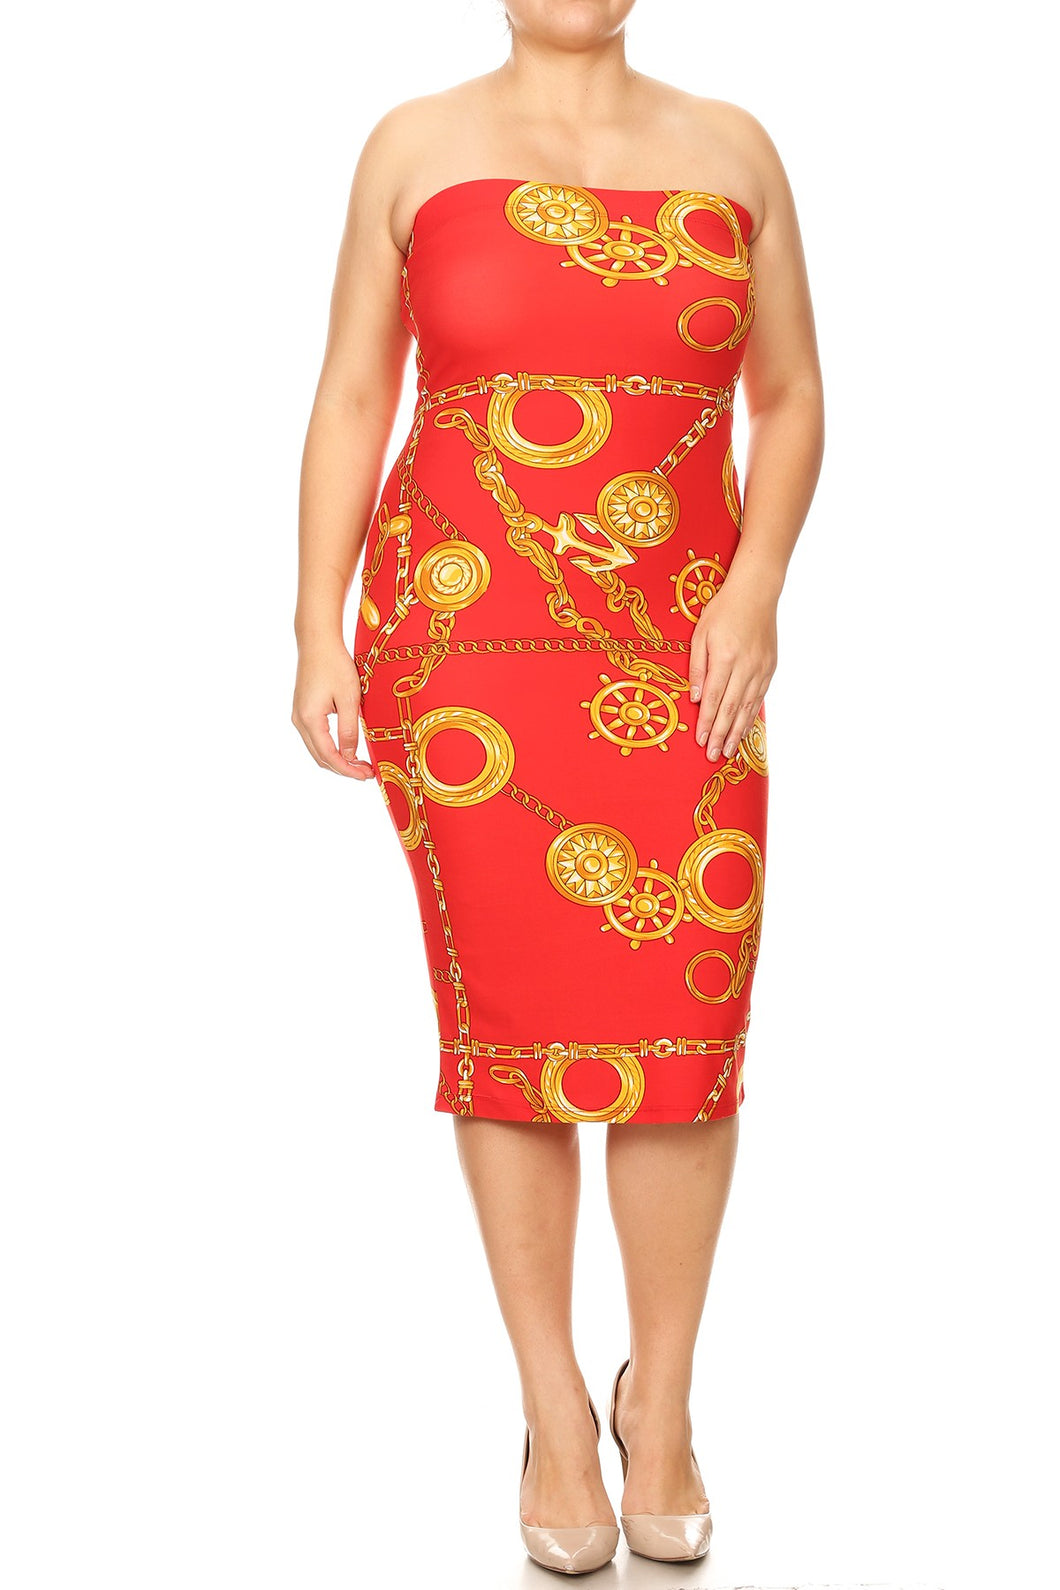 Womens Red Strapless Bodycon Dress